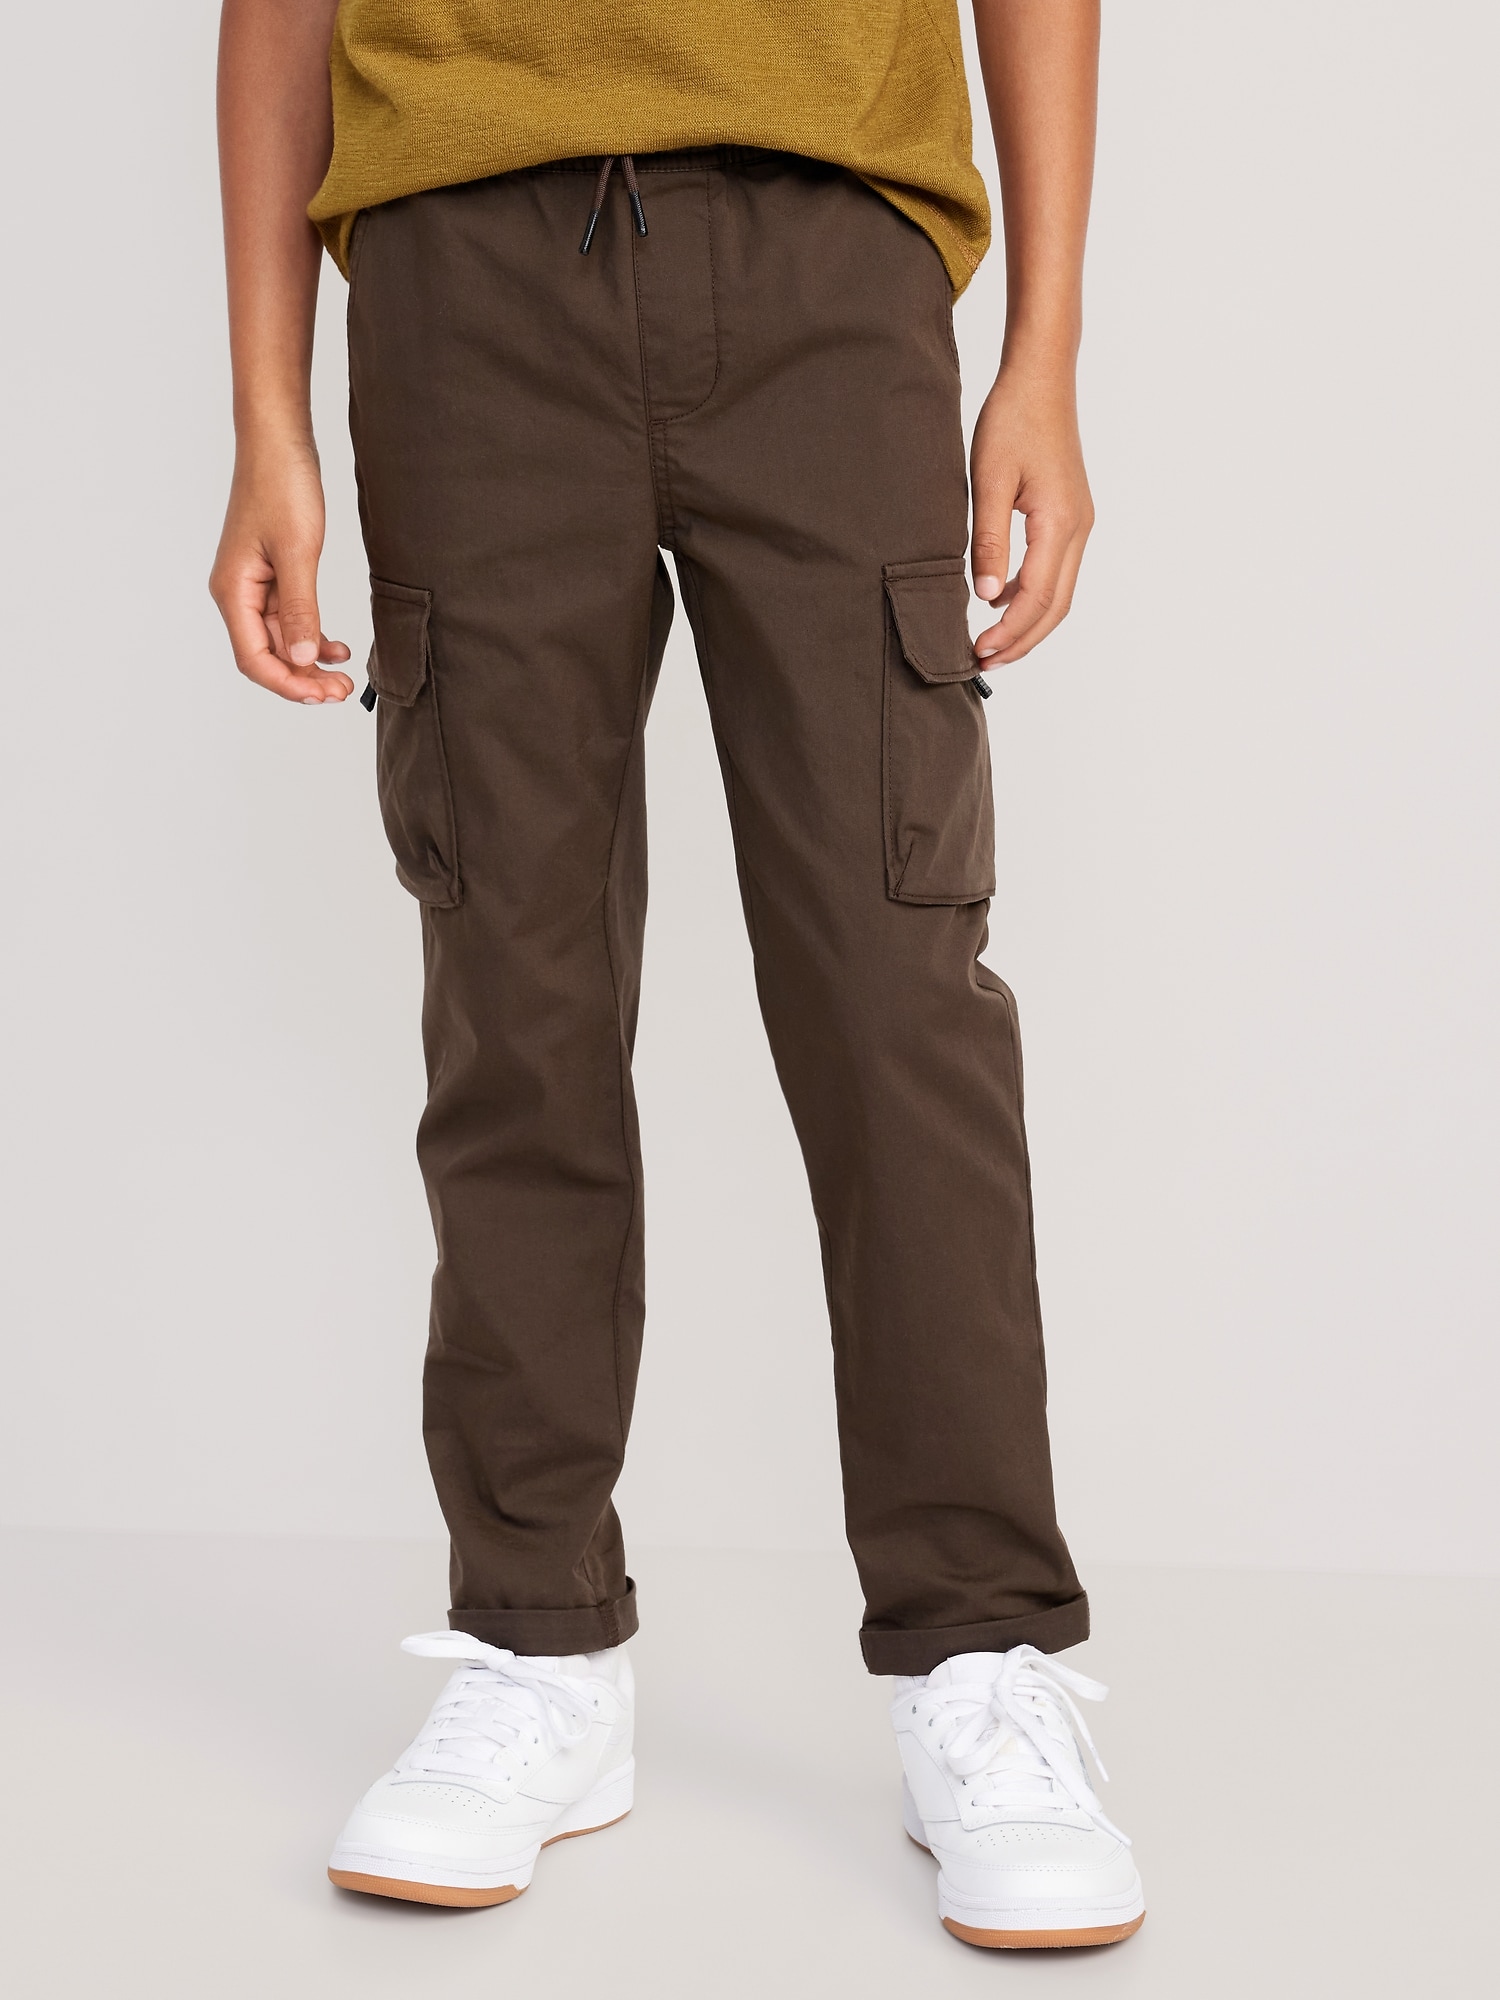 Built-In Flex Tapered Tech Cargo Pants for Boys Hot Deal